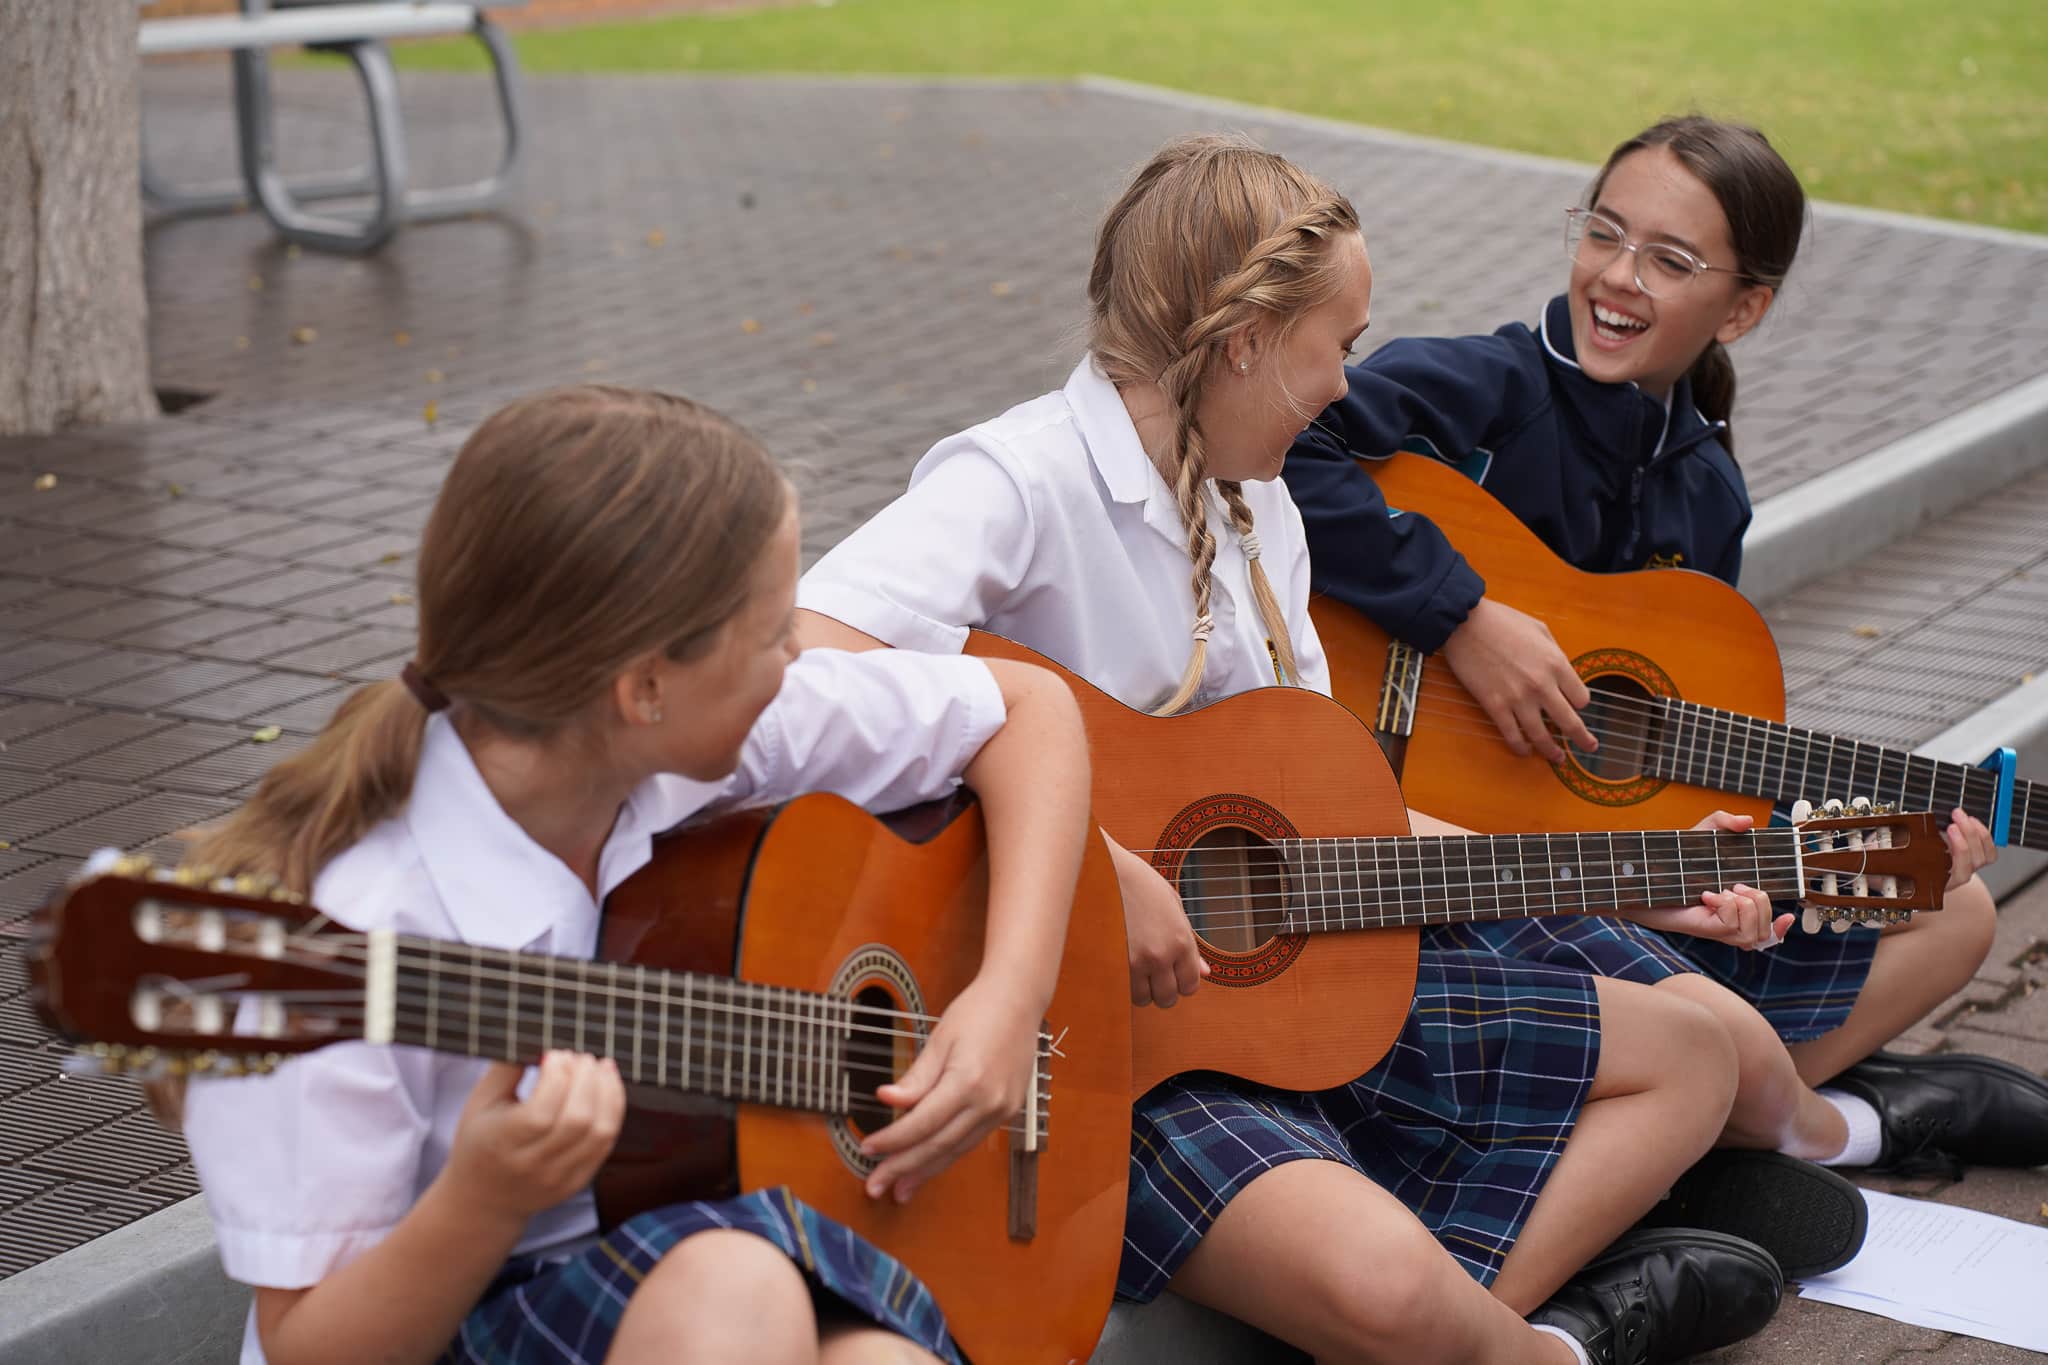 Students playing guitars together